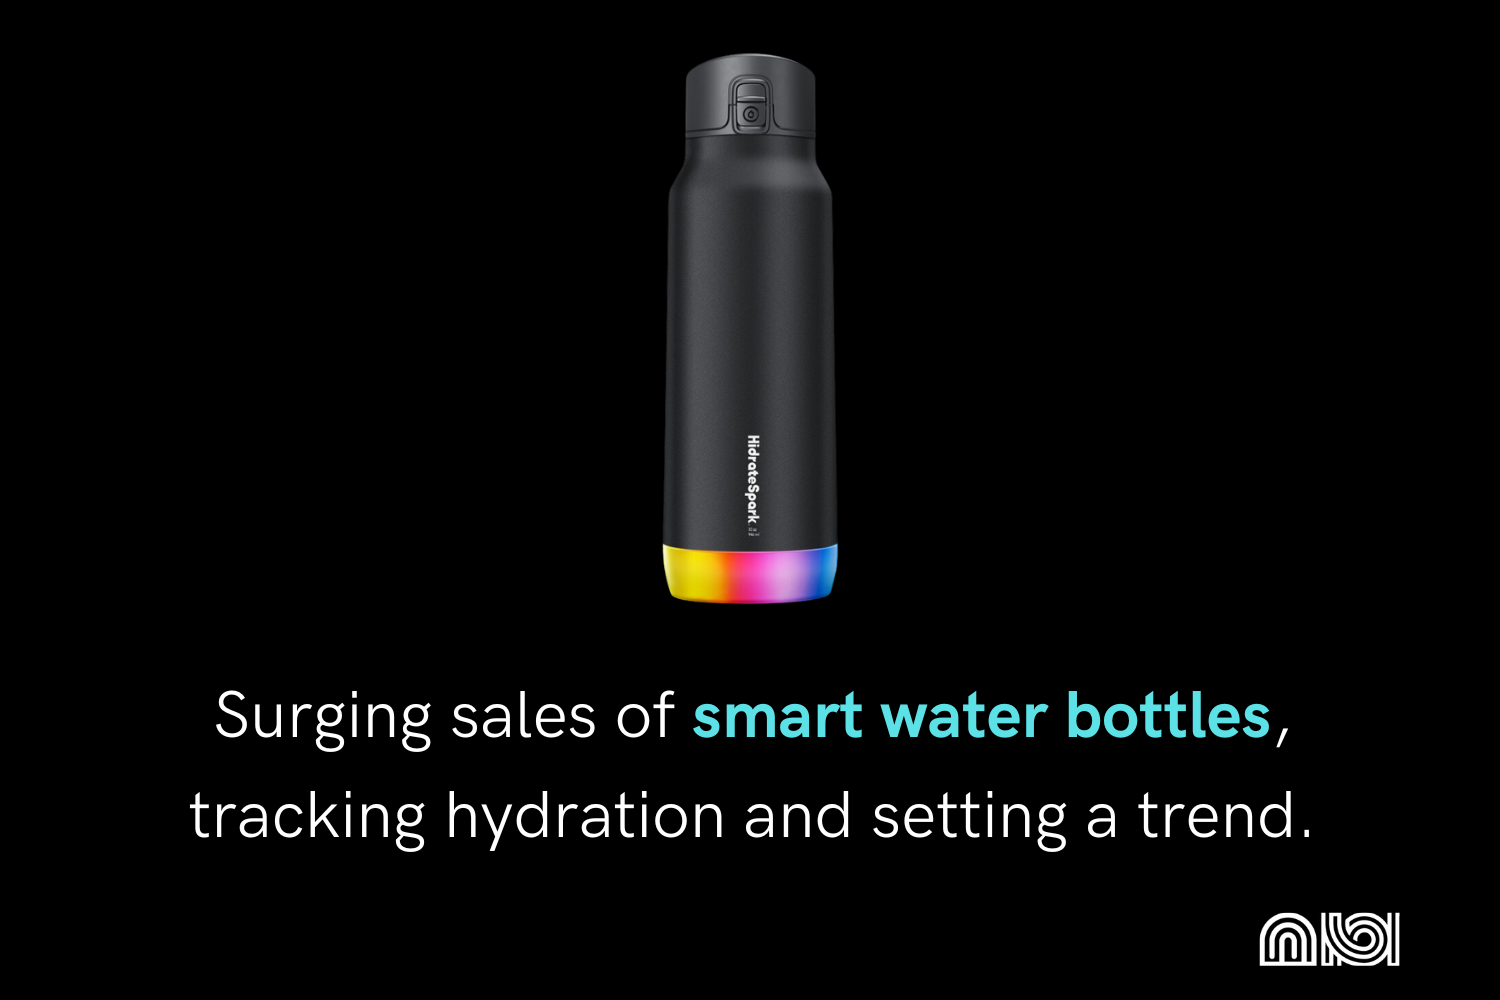 Smart water bottle sales surge, reflecting a growing trend of tracking hydration with innovative technology.